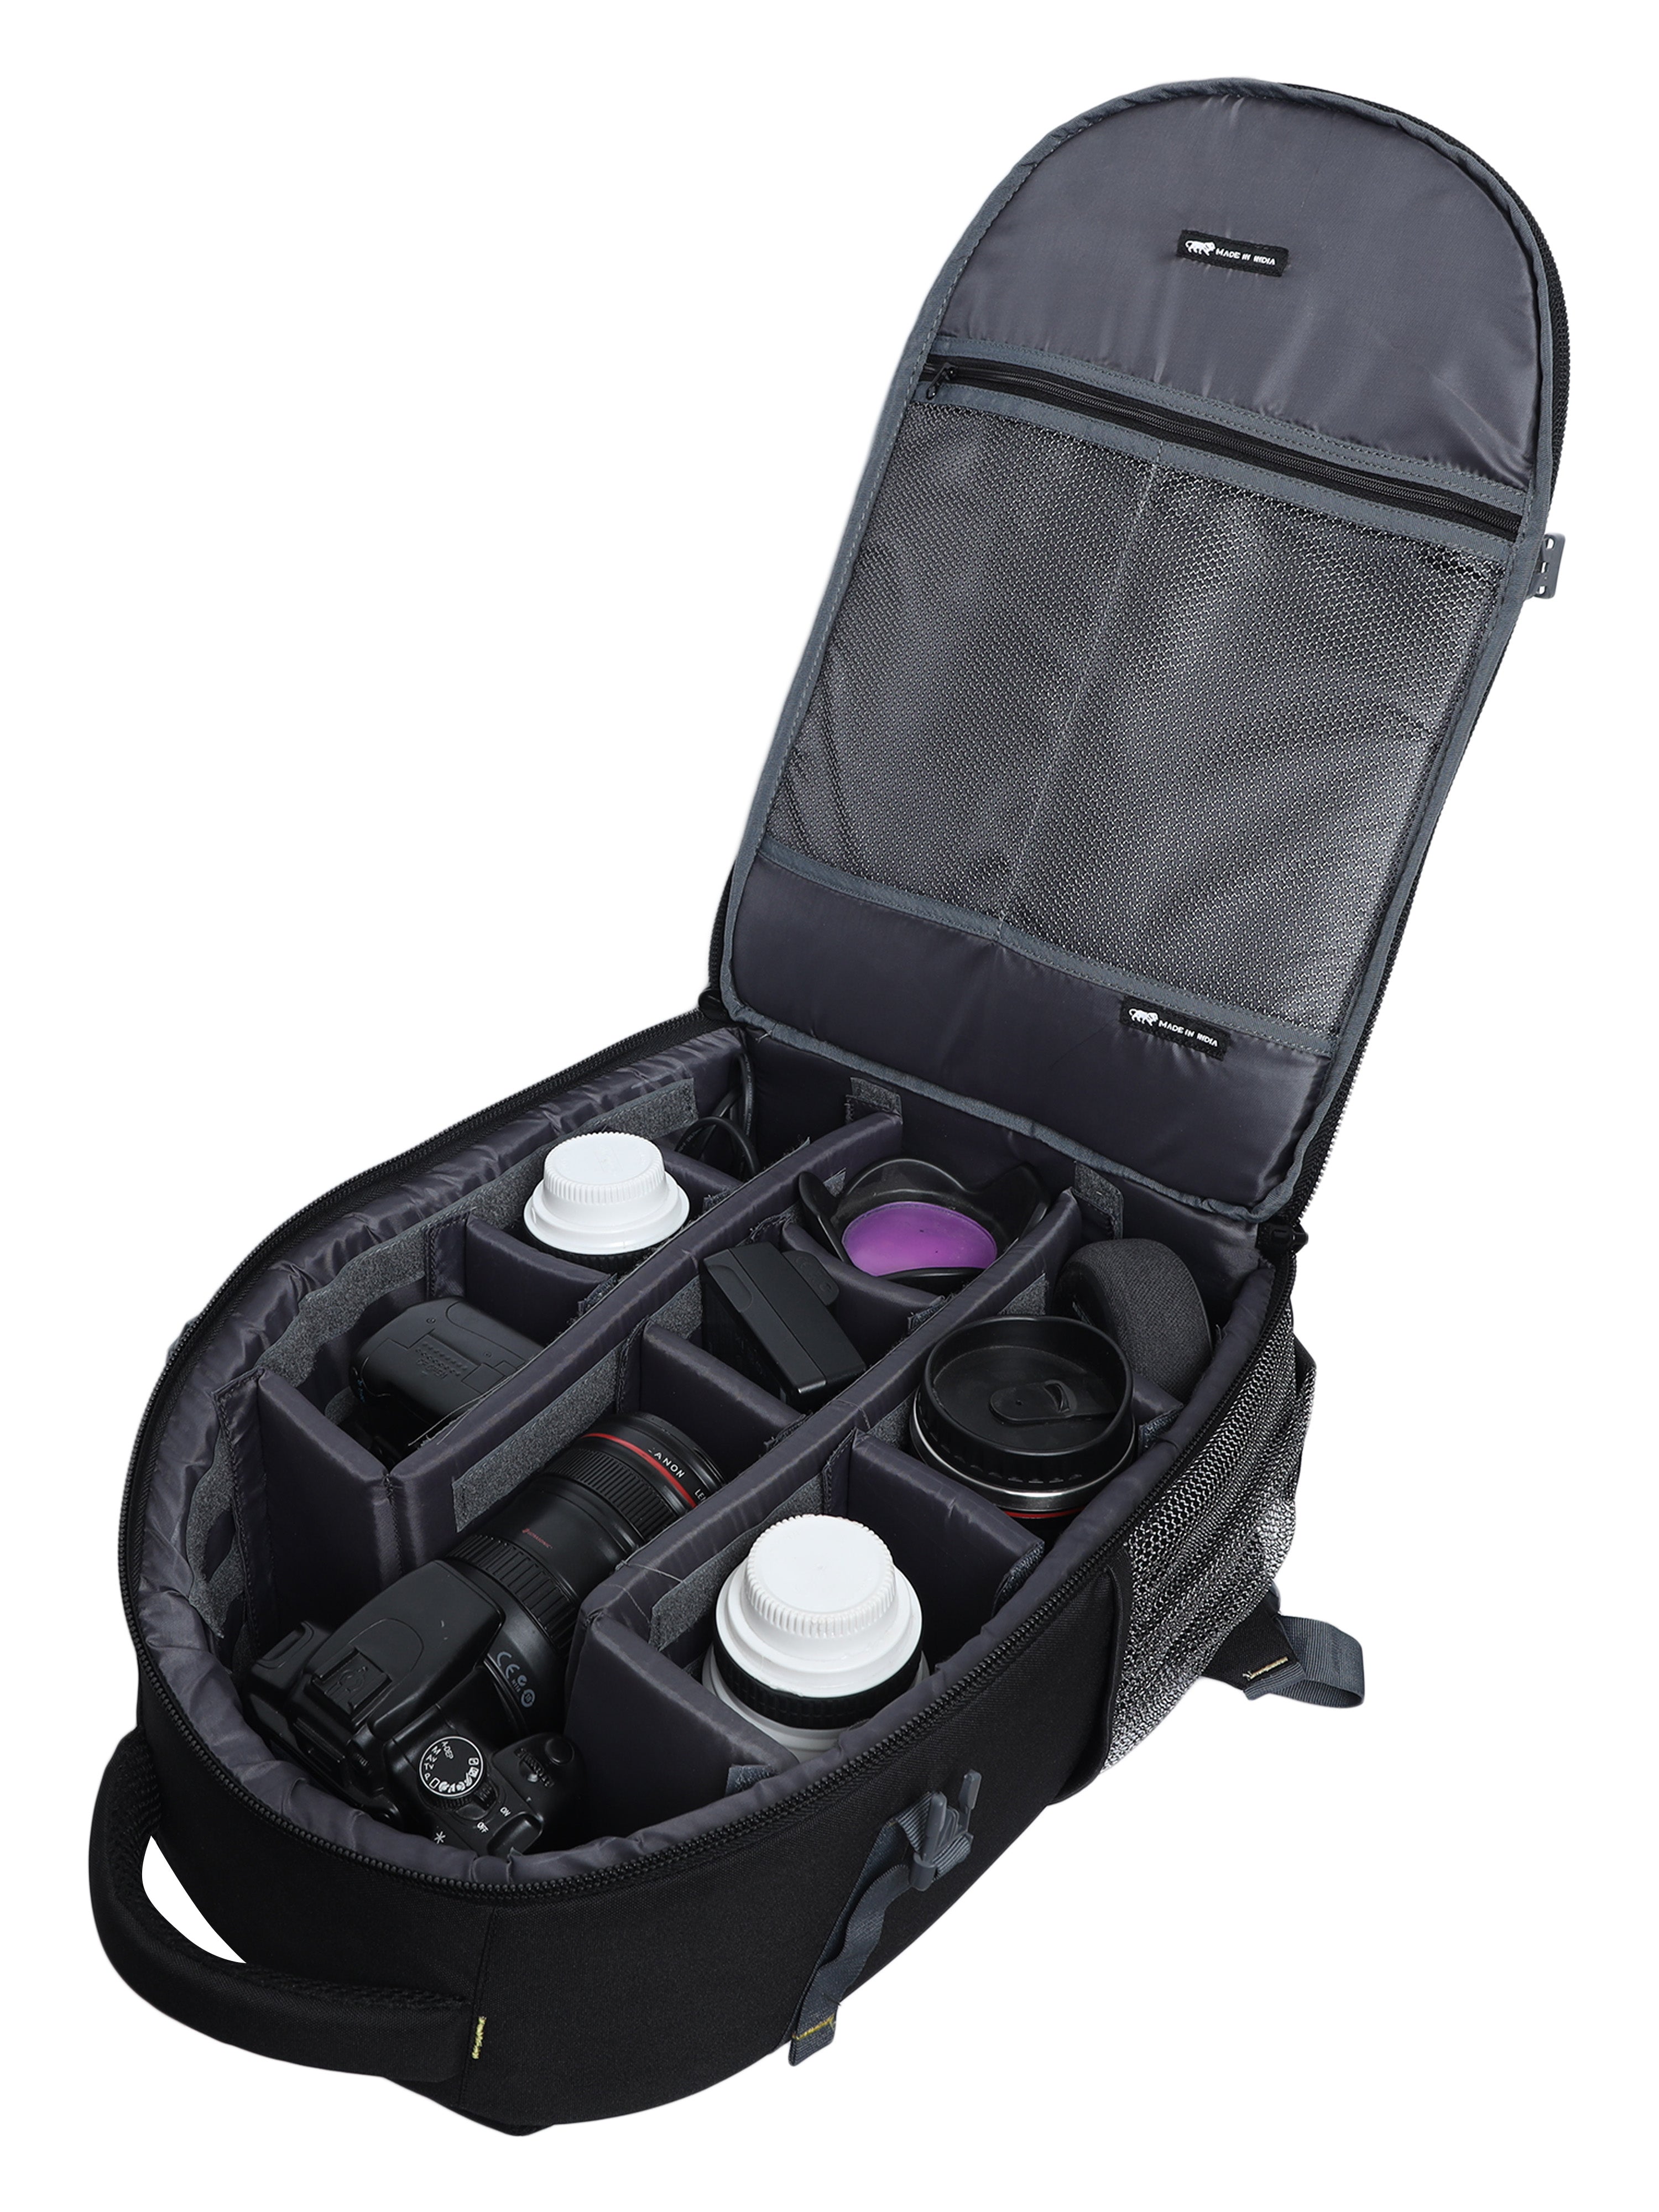 Cotton Camera Carrying Systems - Quality Camera and Binocular Gear